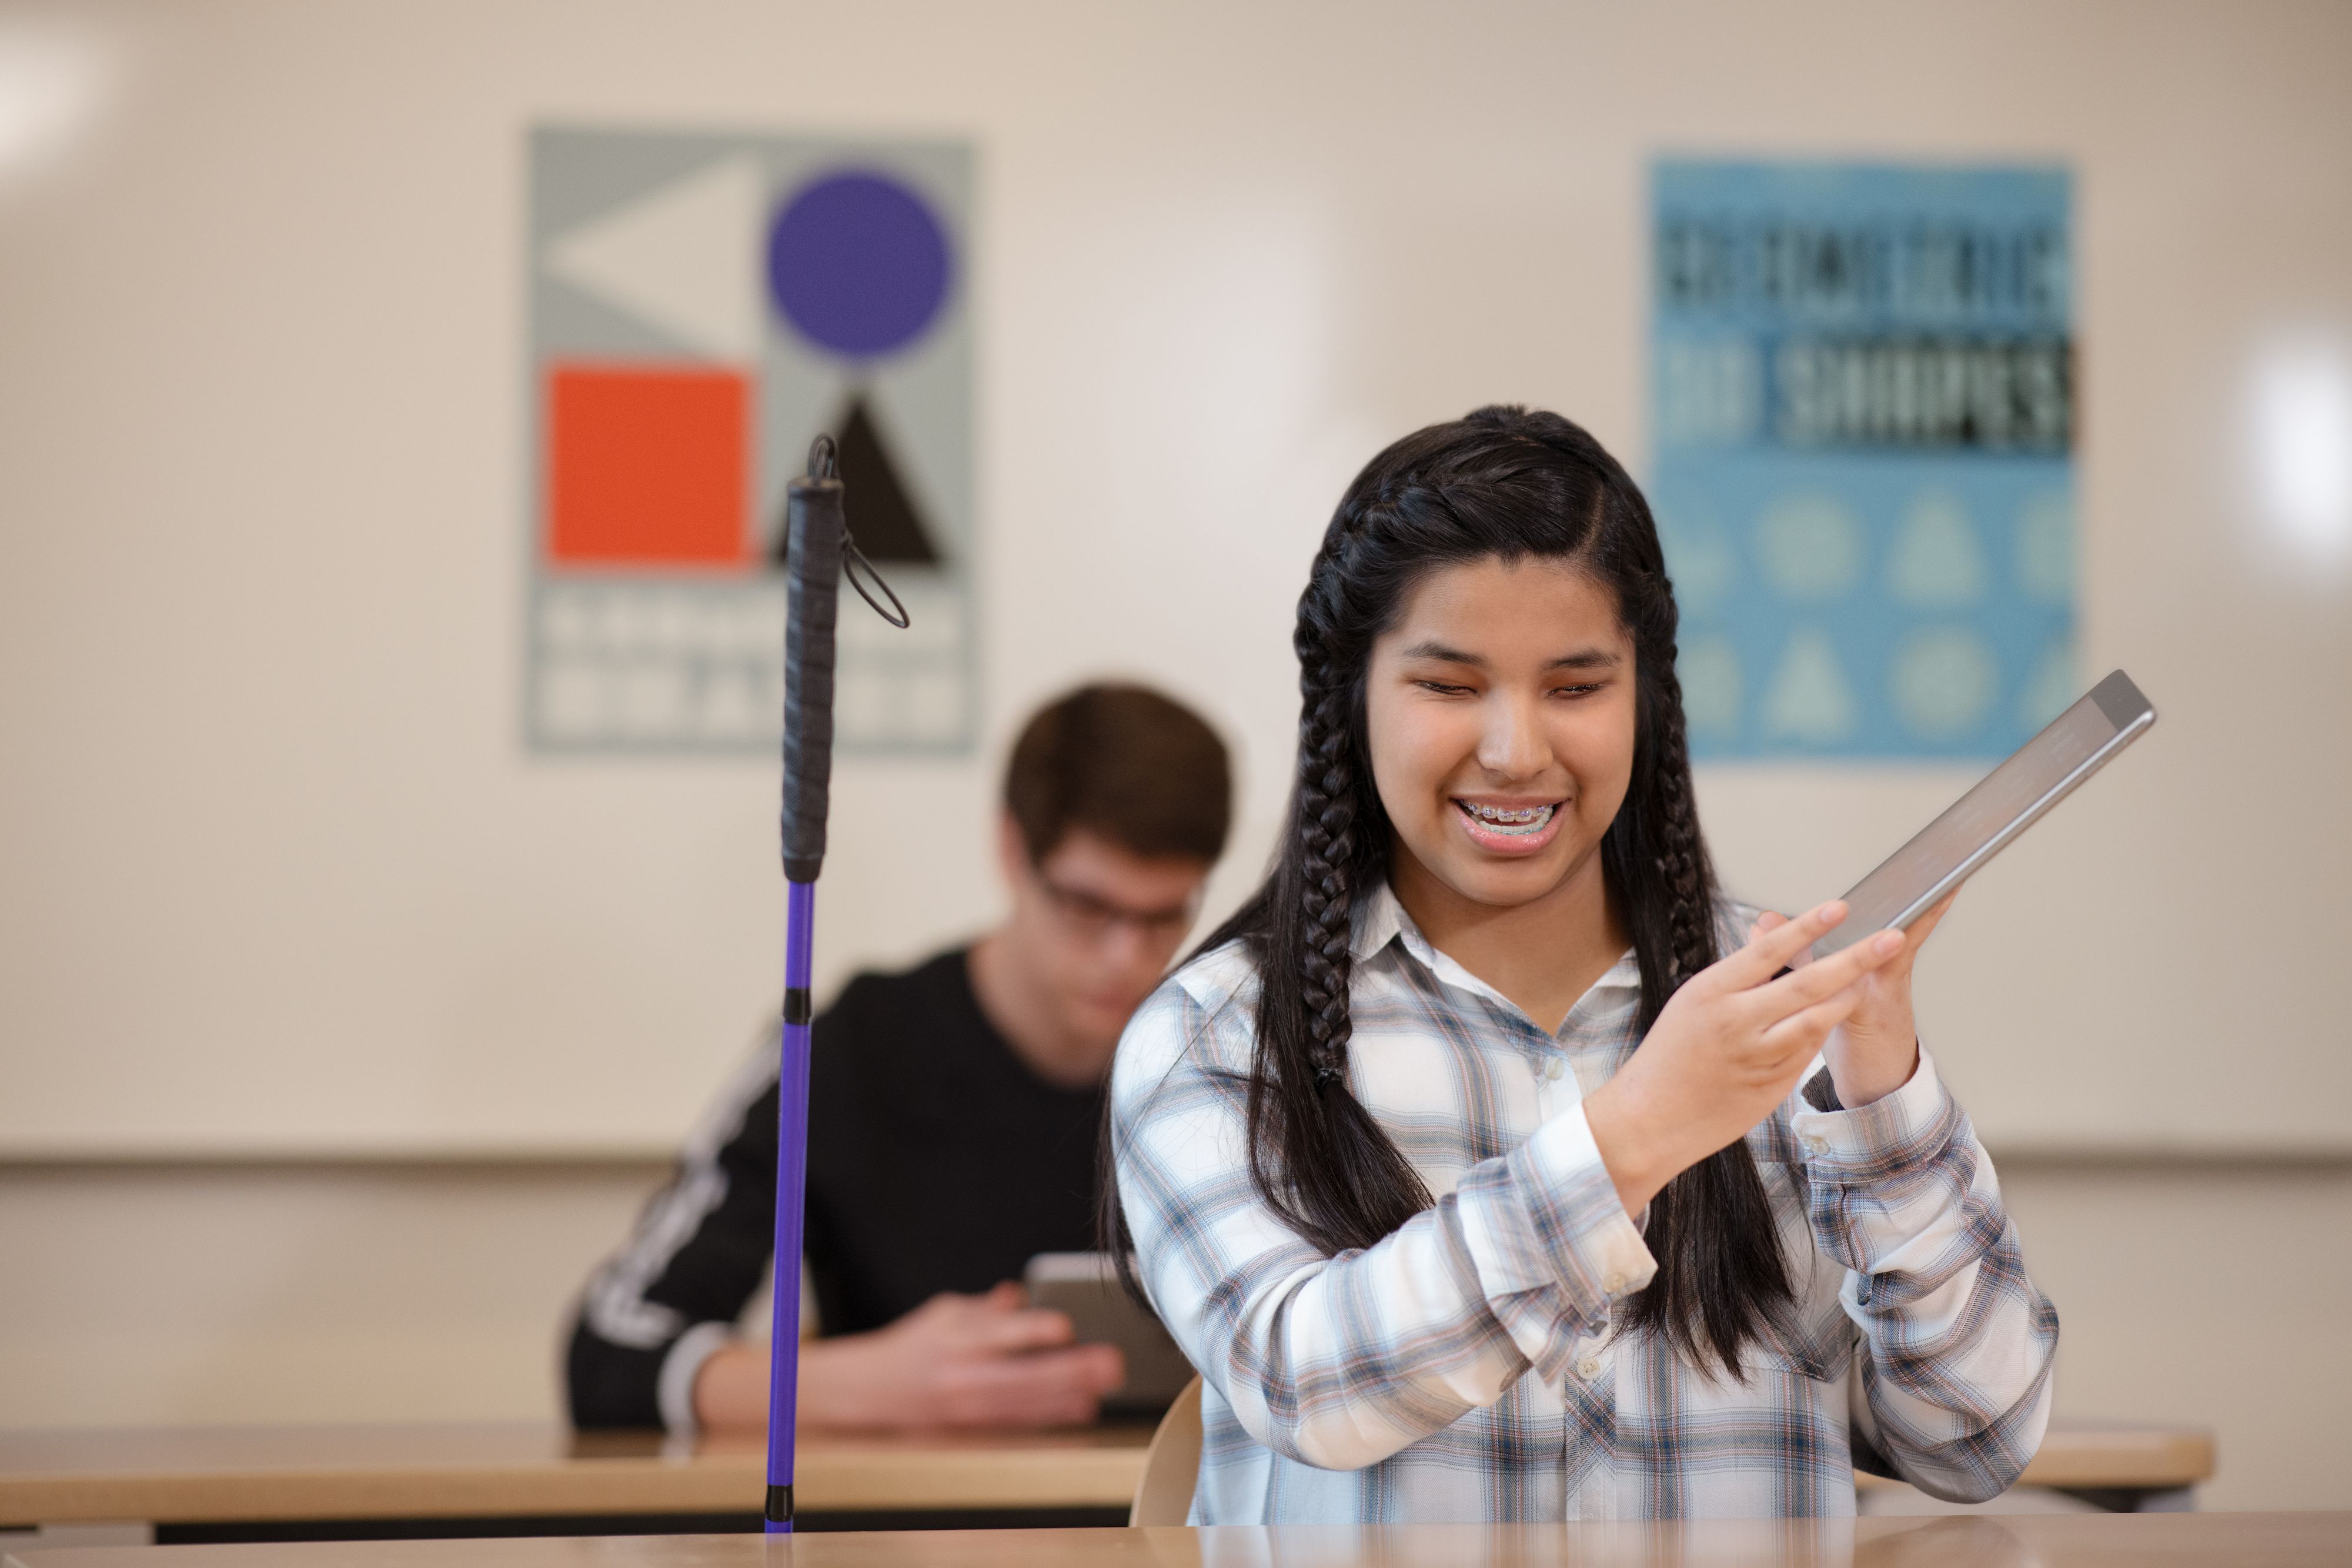 Student using Accessibility features on an Apple Education device in the classroom